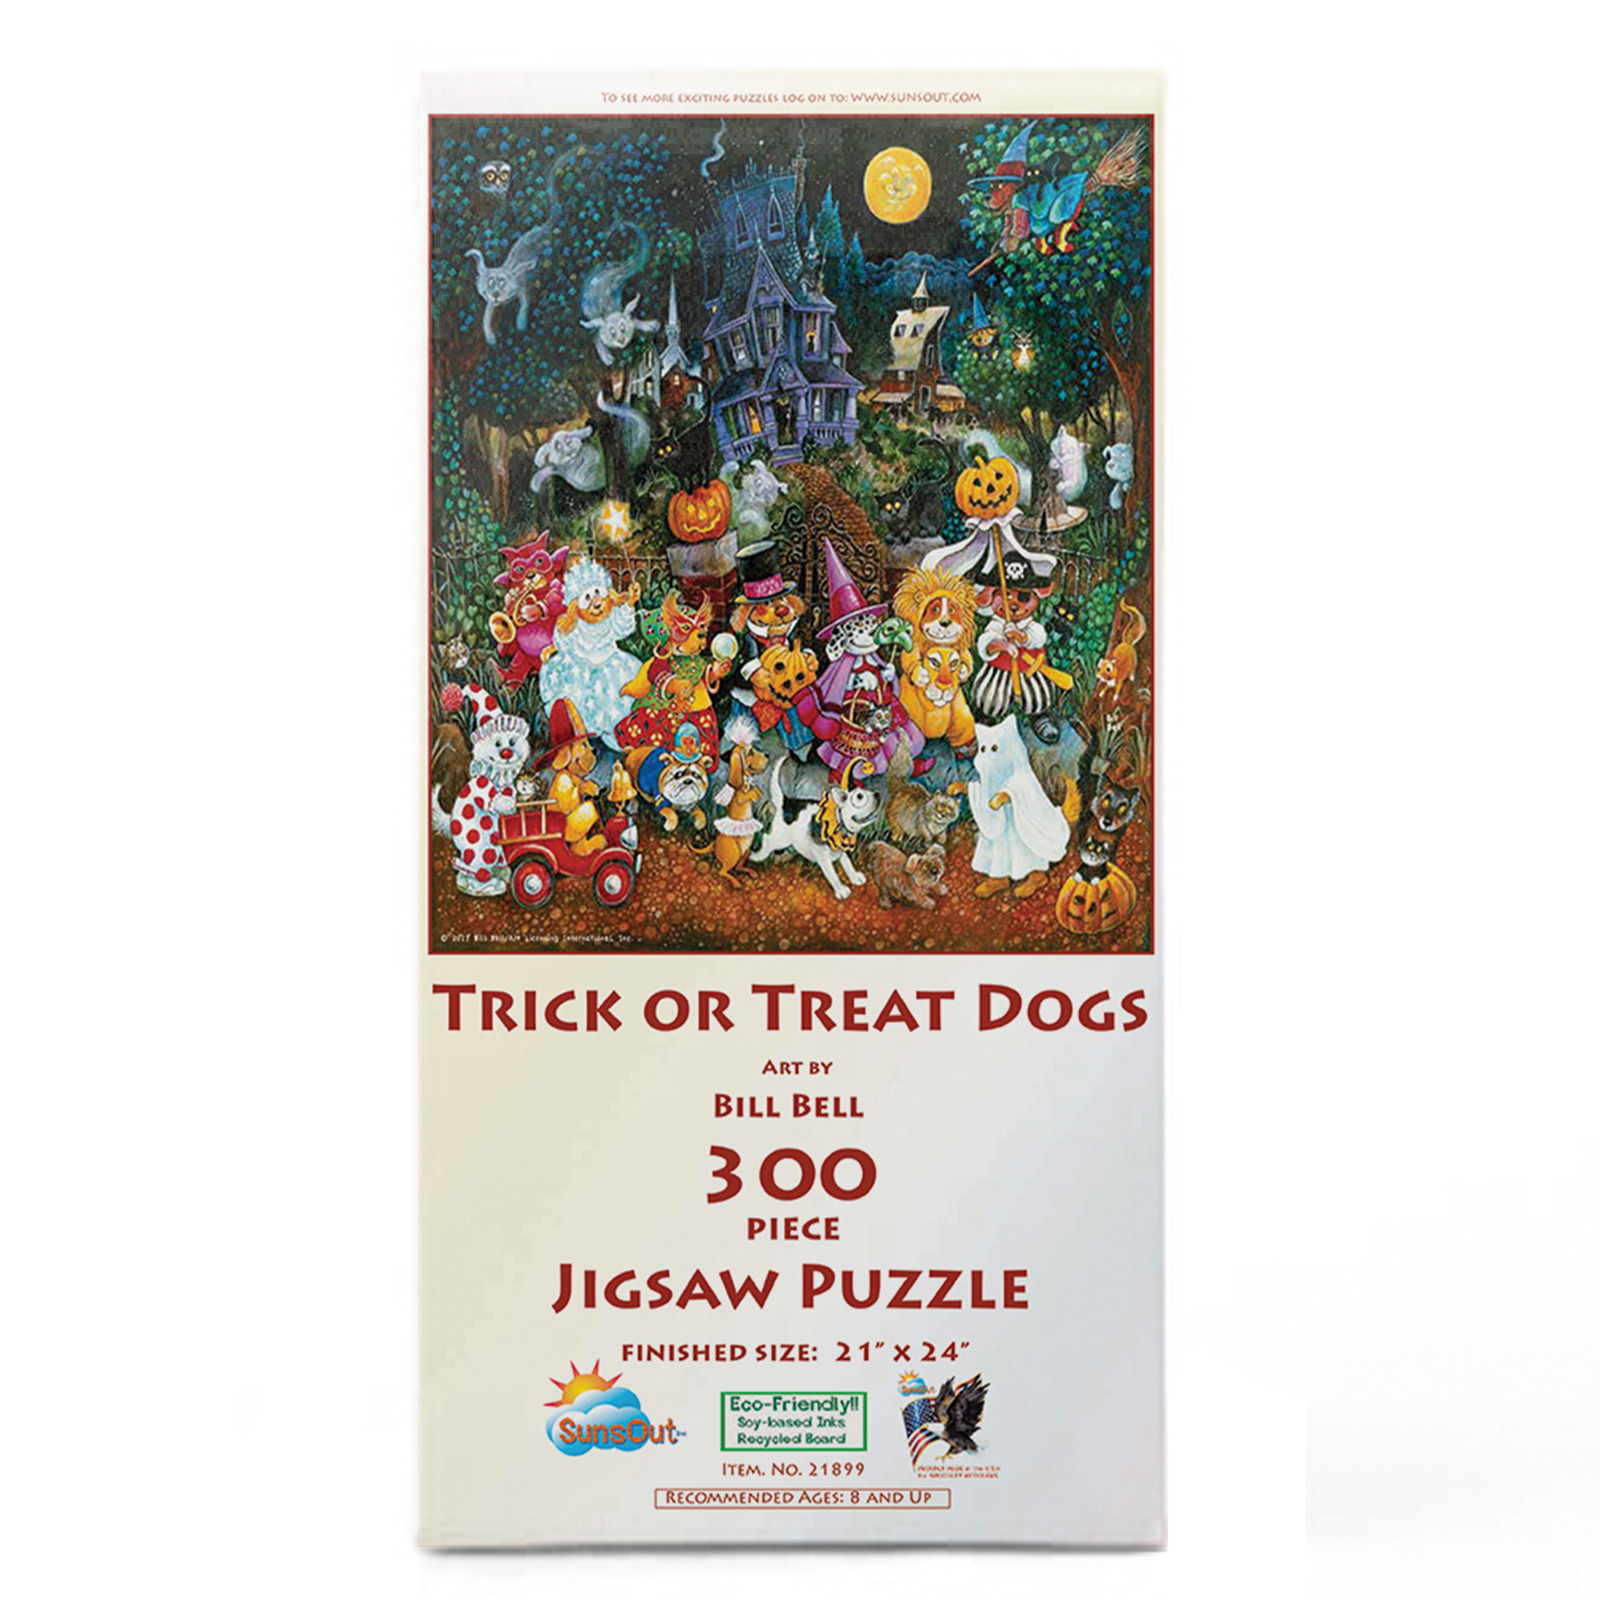 Trick or Treat Dogs